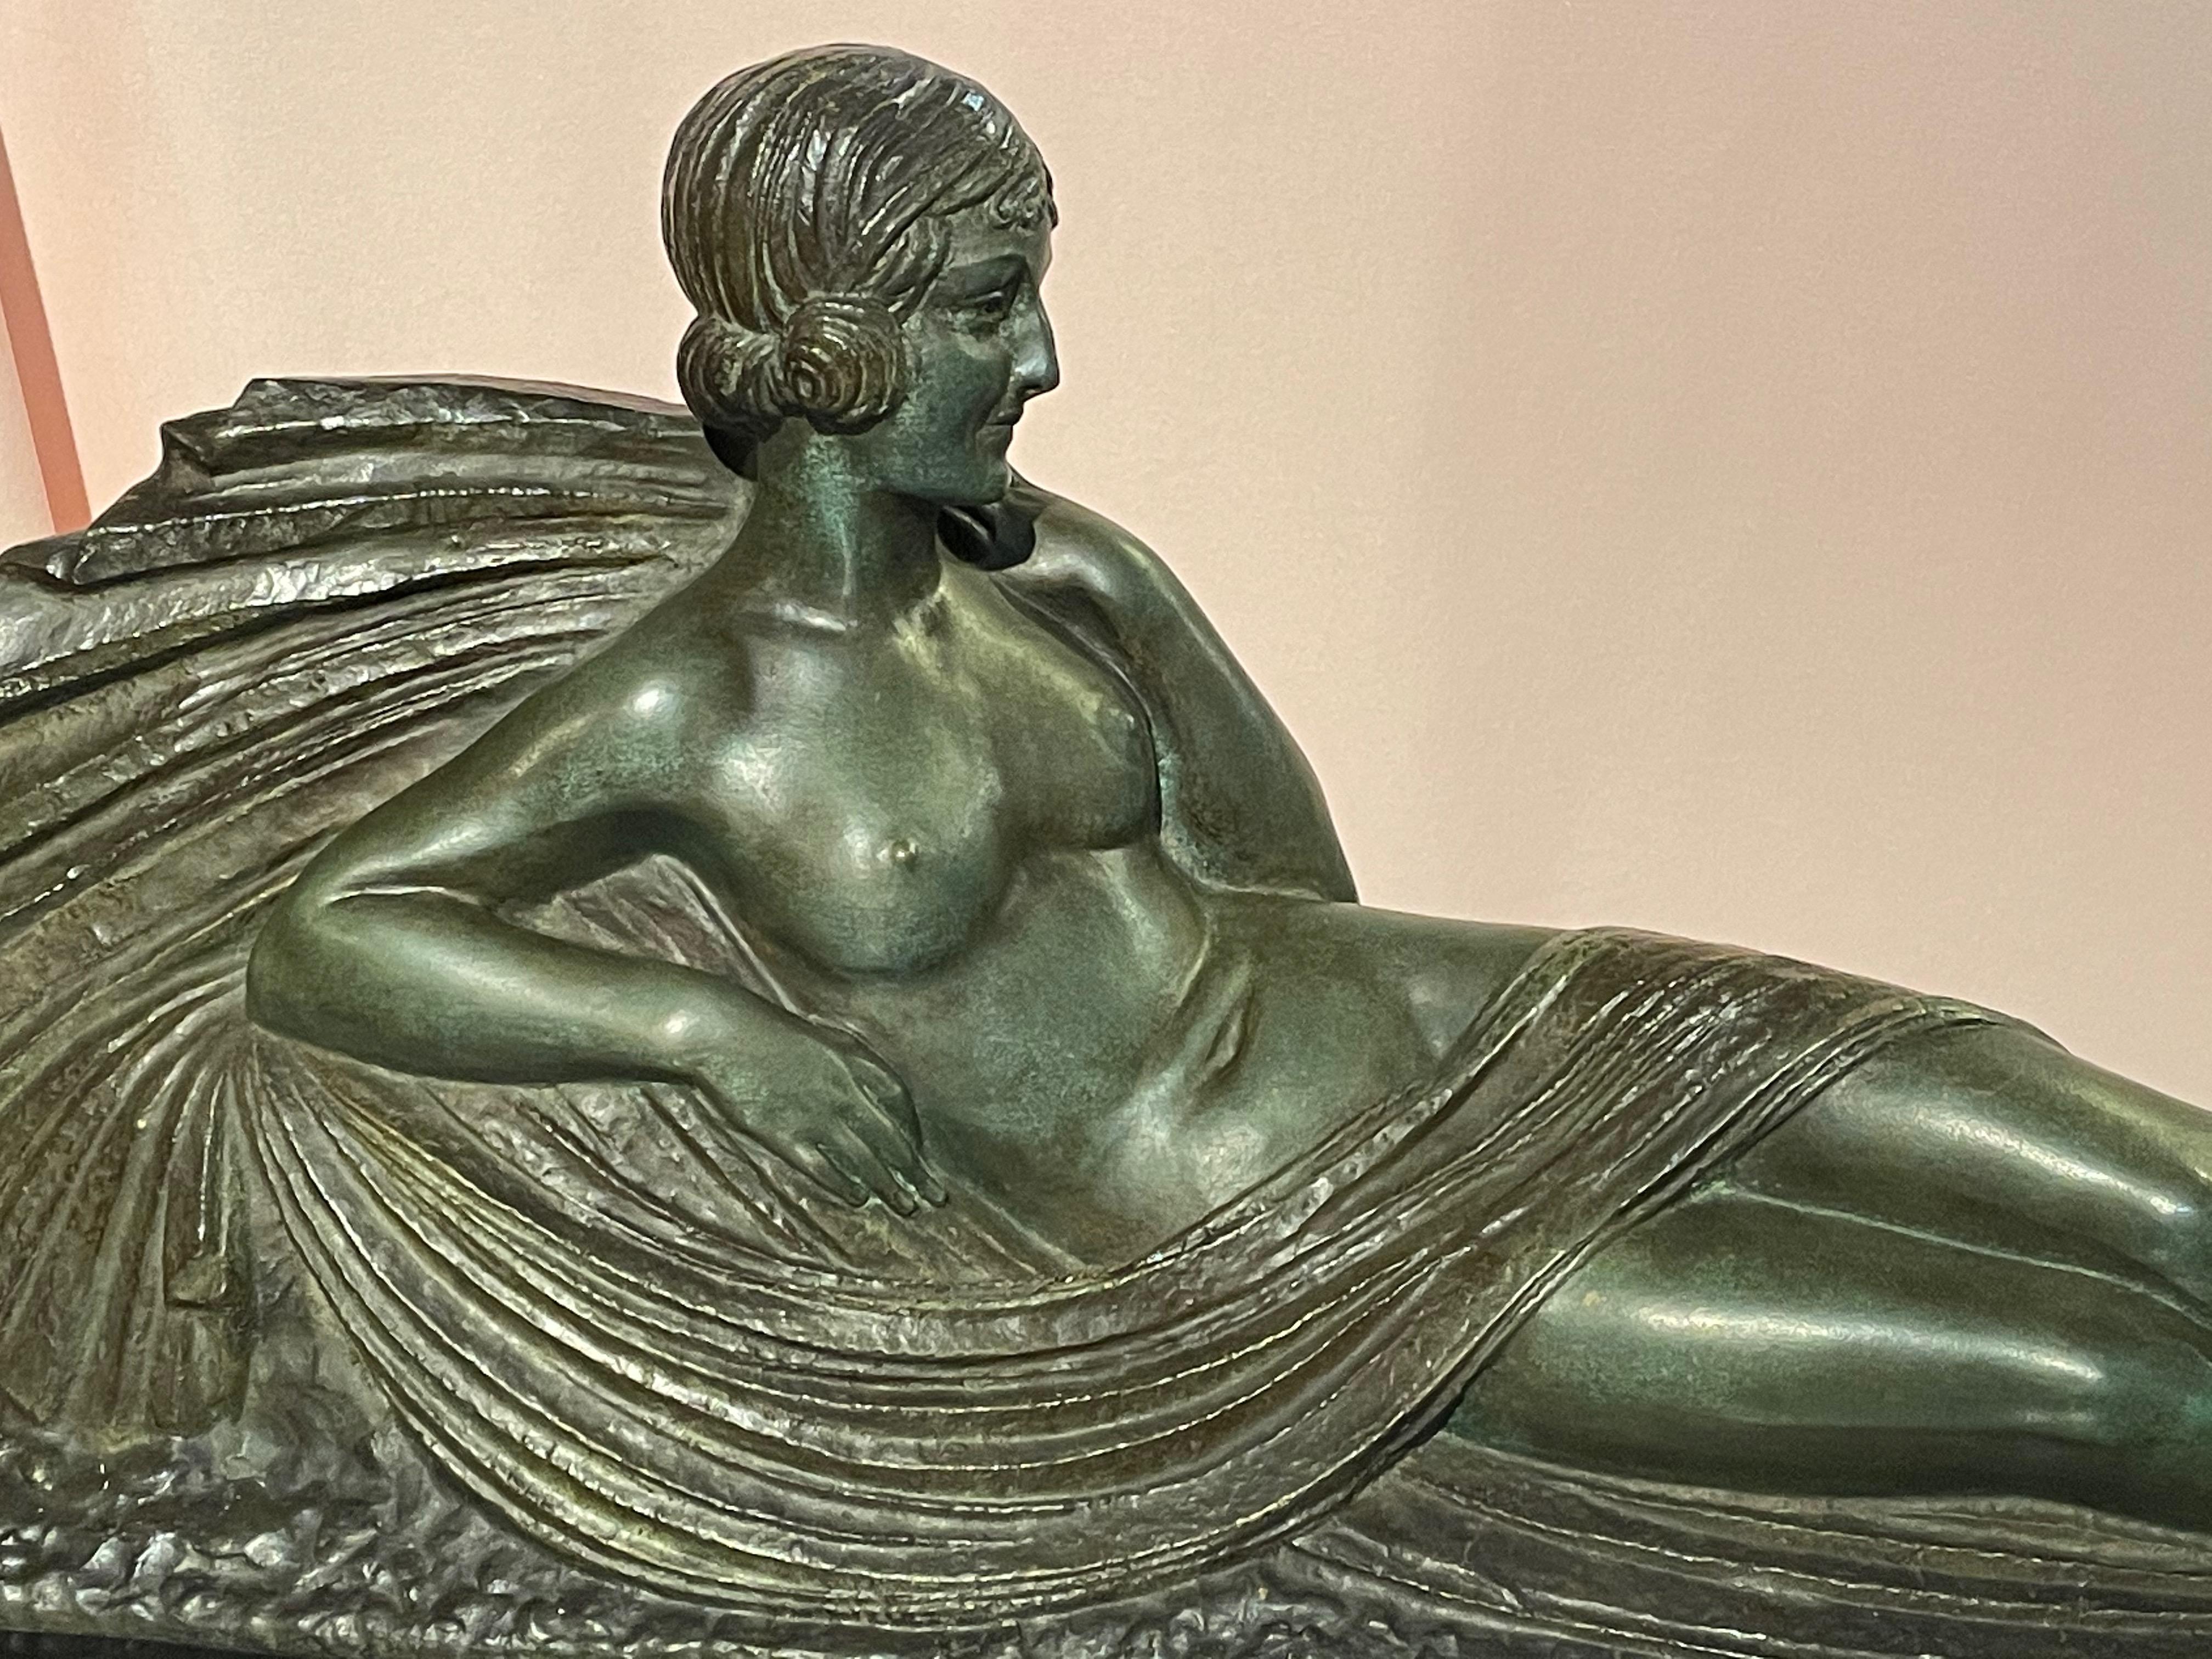 An Art Deco bronze sculpture by Darcles entitled “Nu Allonge” (Reclining Nude) on a marble base. Created in 1925 and embodying all the stylistic elements of the Deco Era and executed by the master sculptor “Darcles”. The period hairstyle in rolls